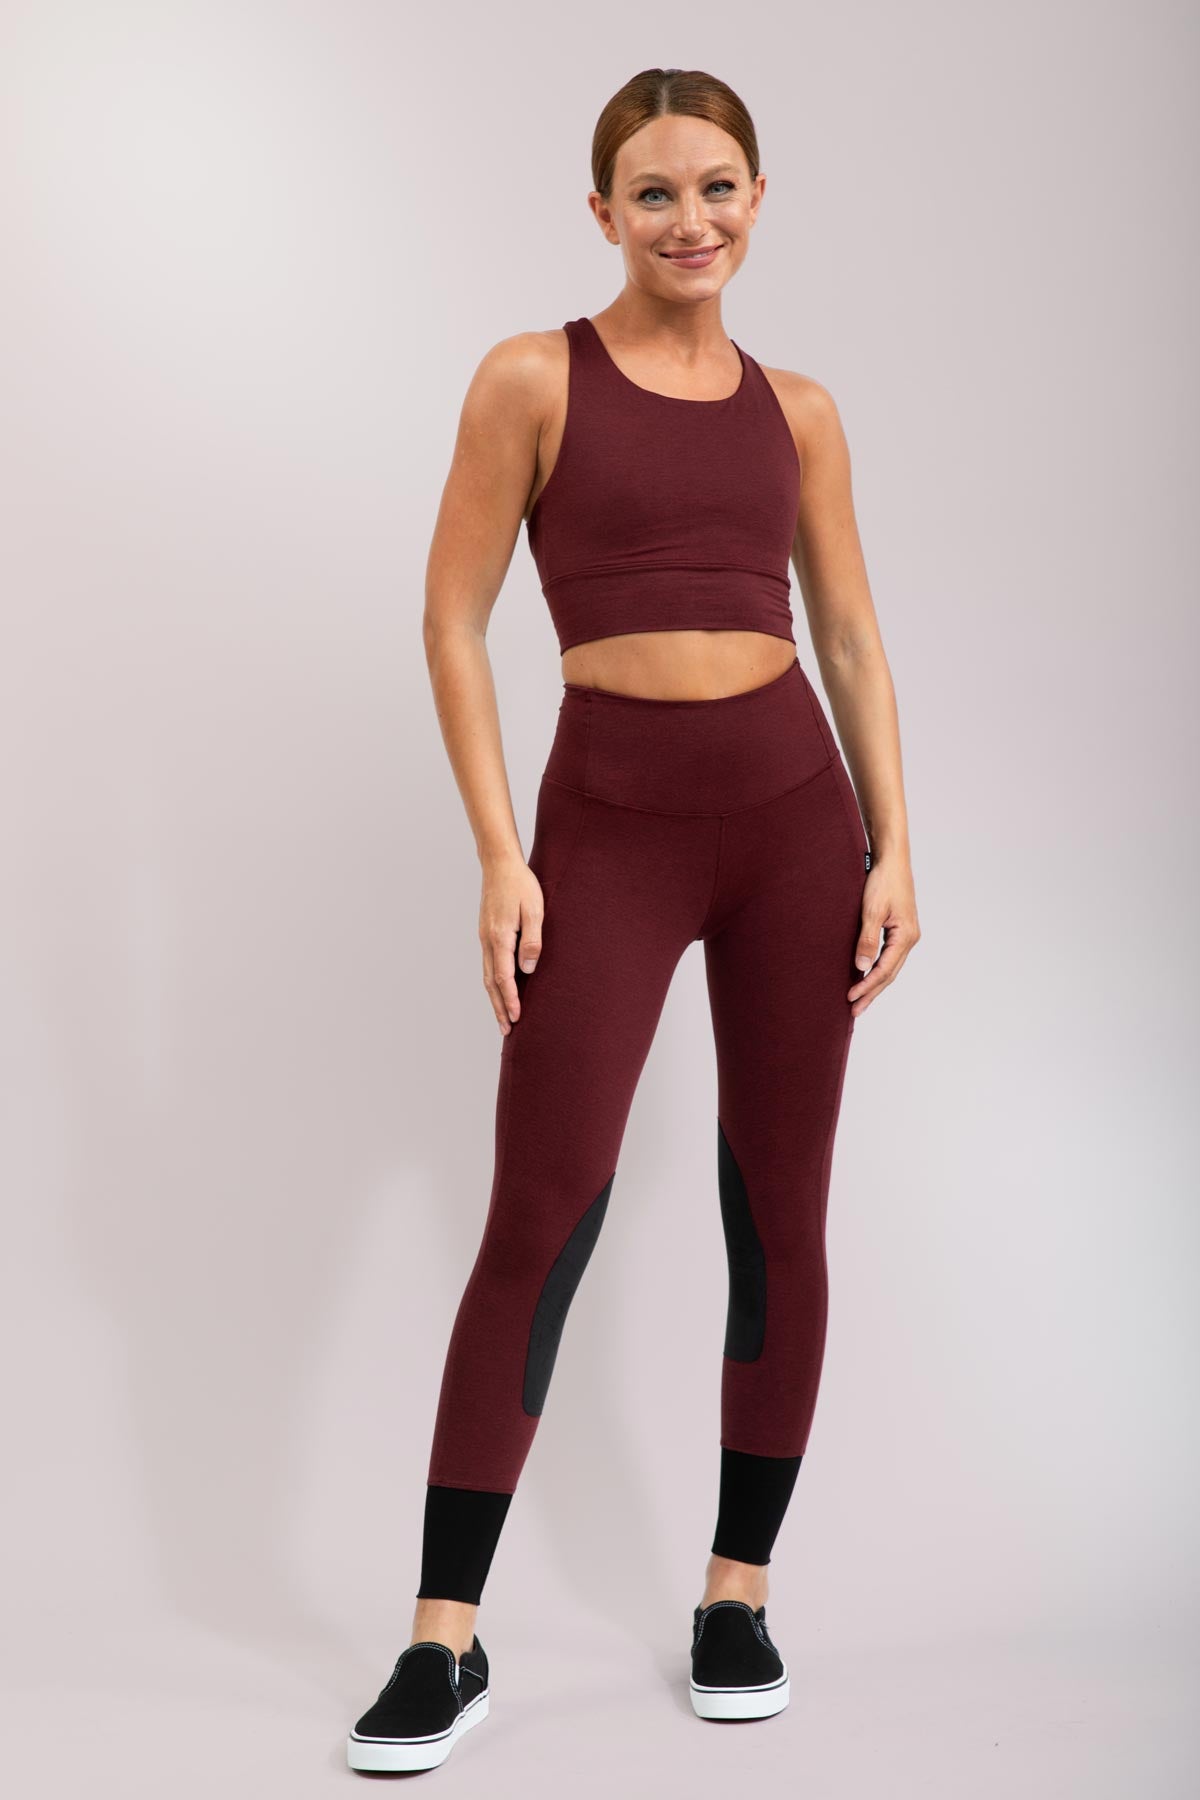 Bred GBA All Over leggings – Grind Build Achieve